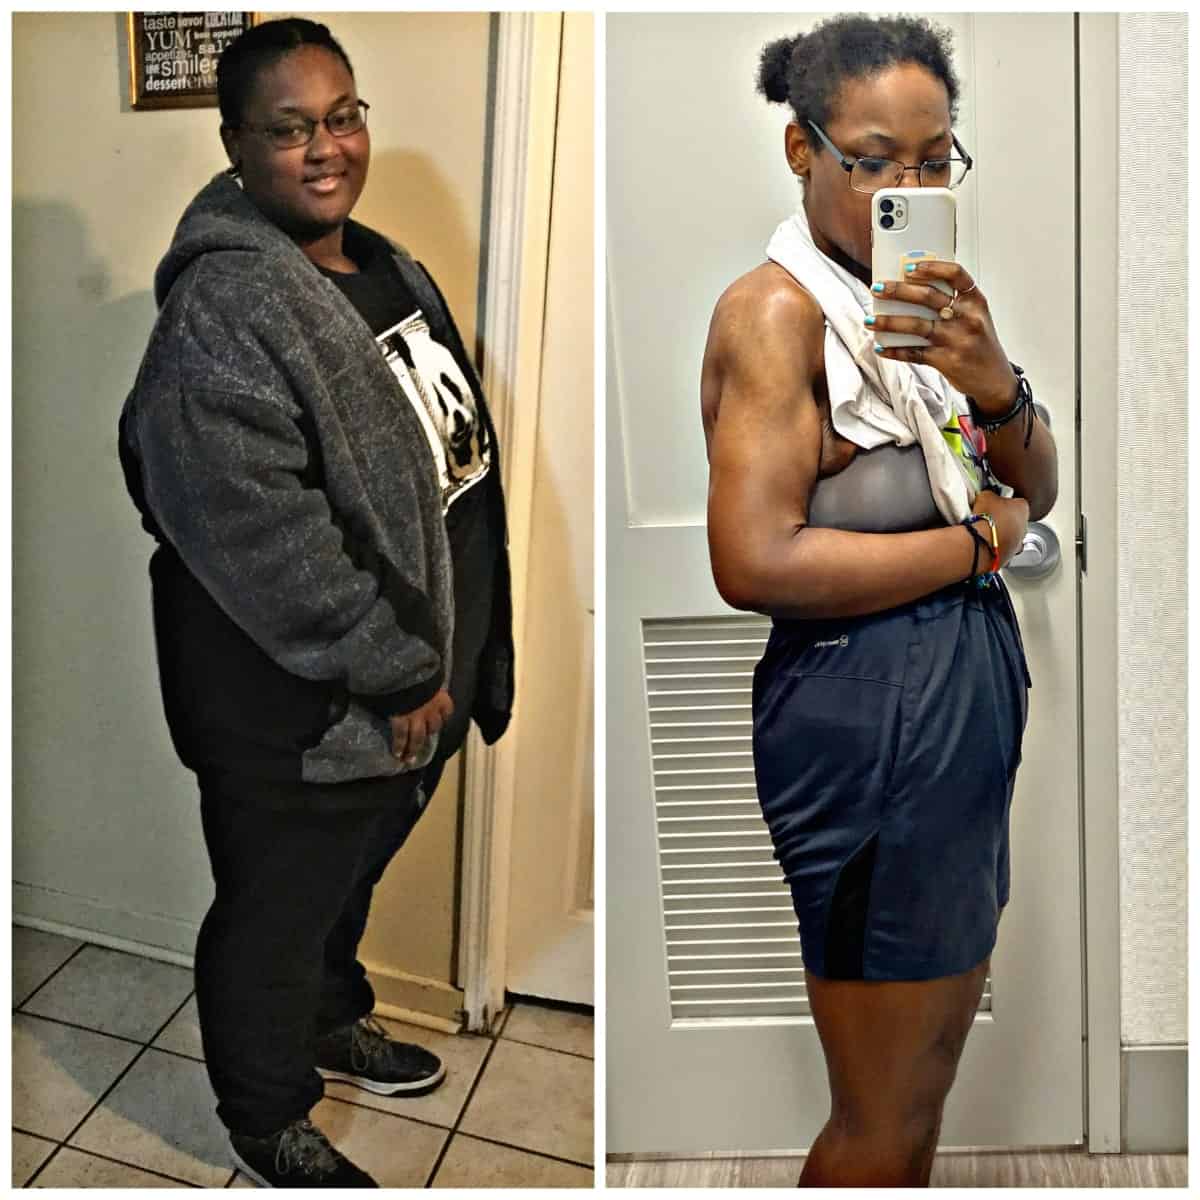 Side by side photos of Miyahnna before and after weight loss.